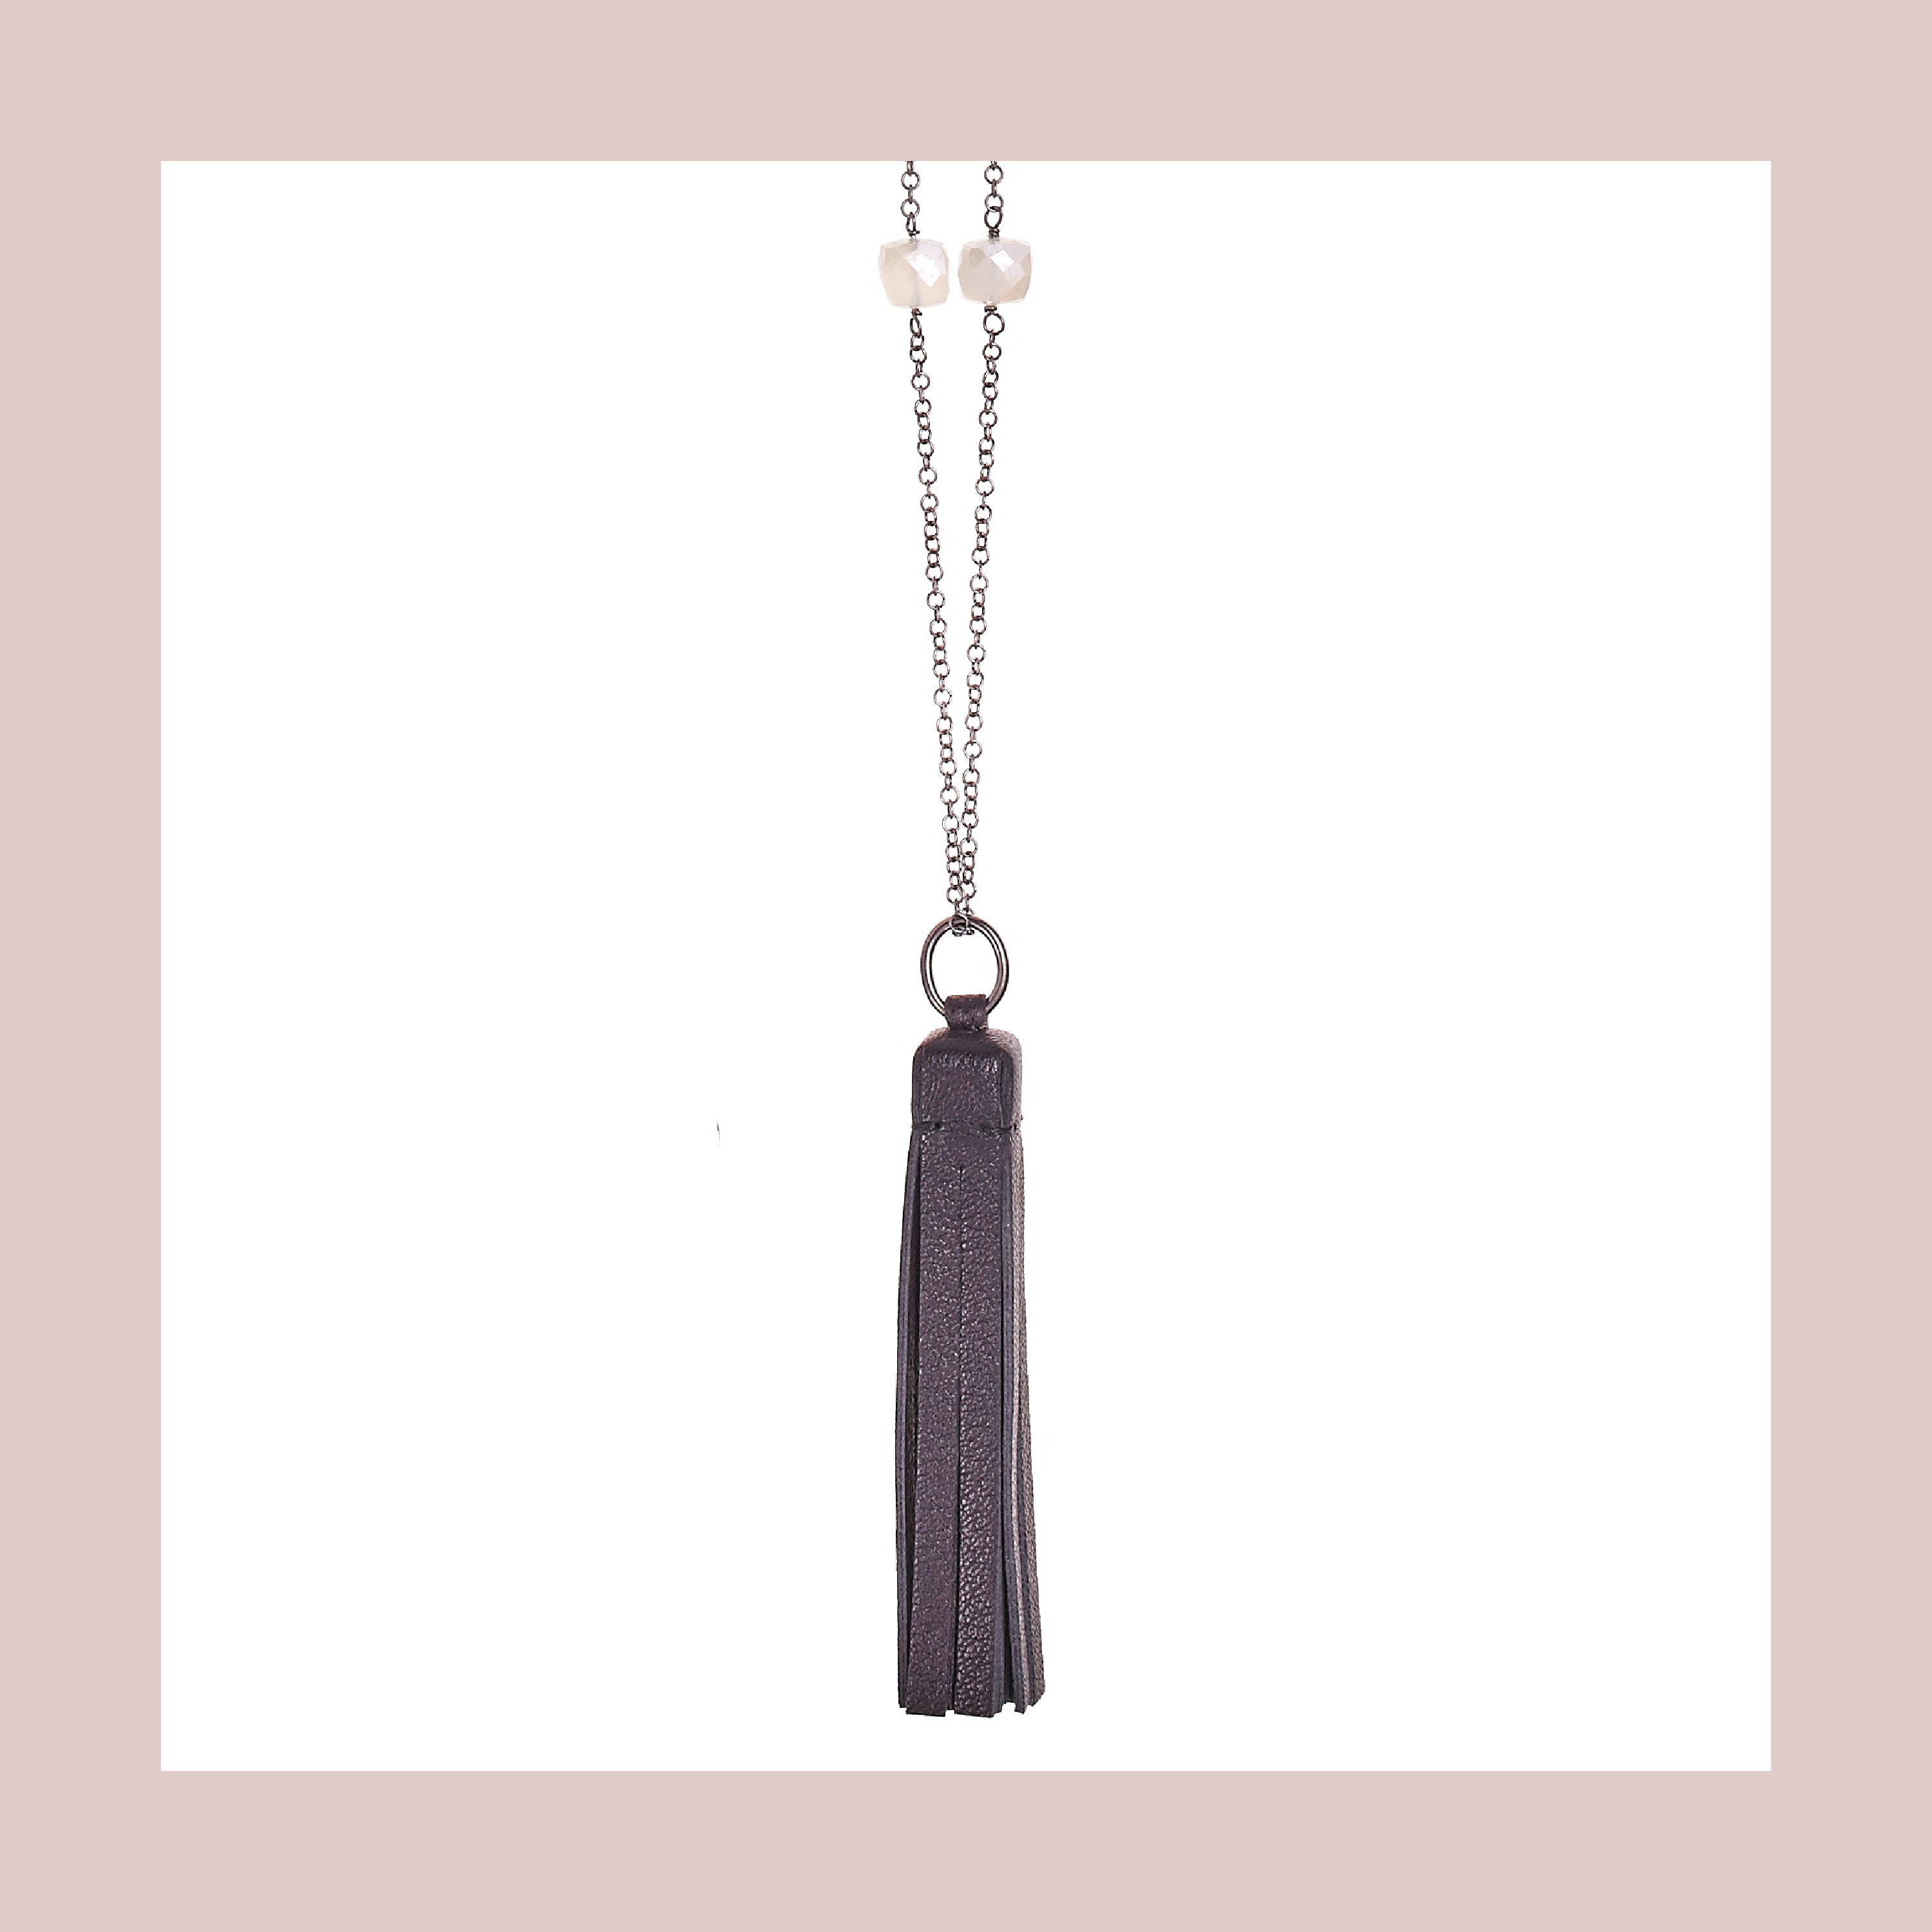 Tassel “Square” Necklace with Black Leather and Chalcedony